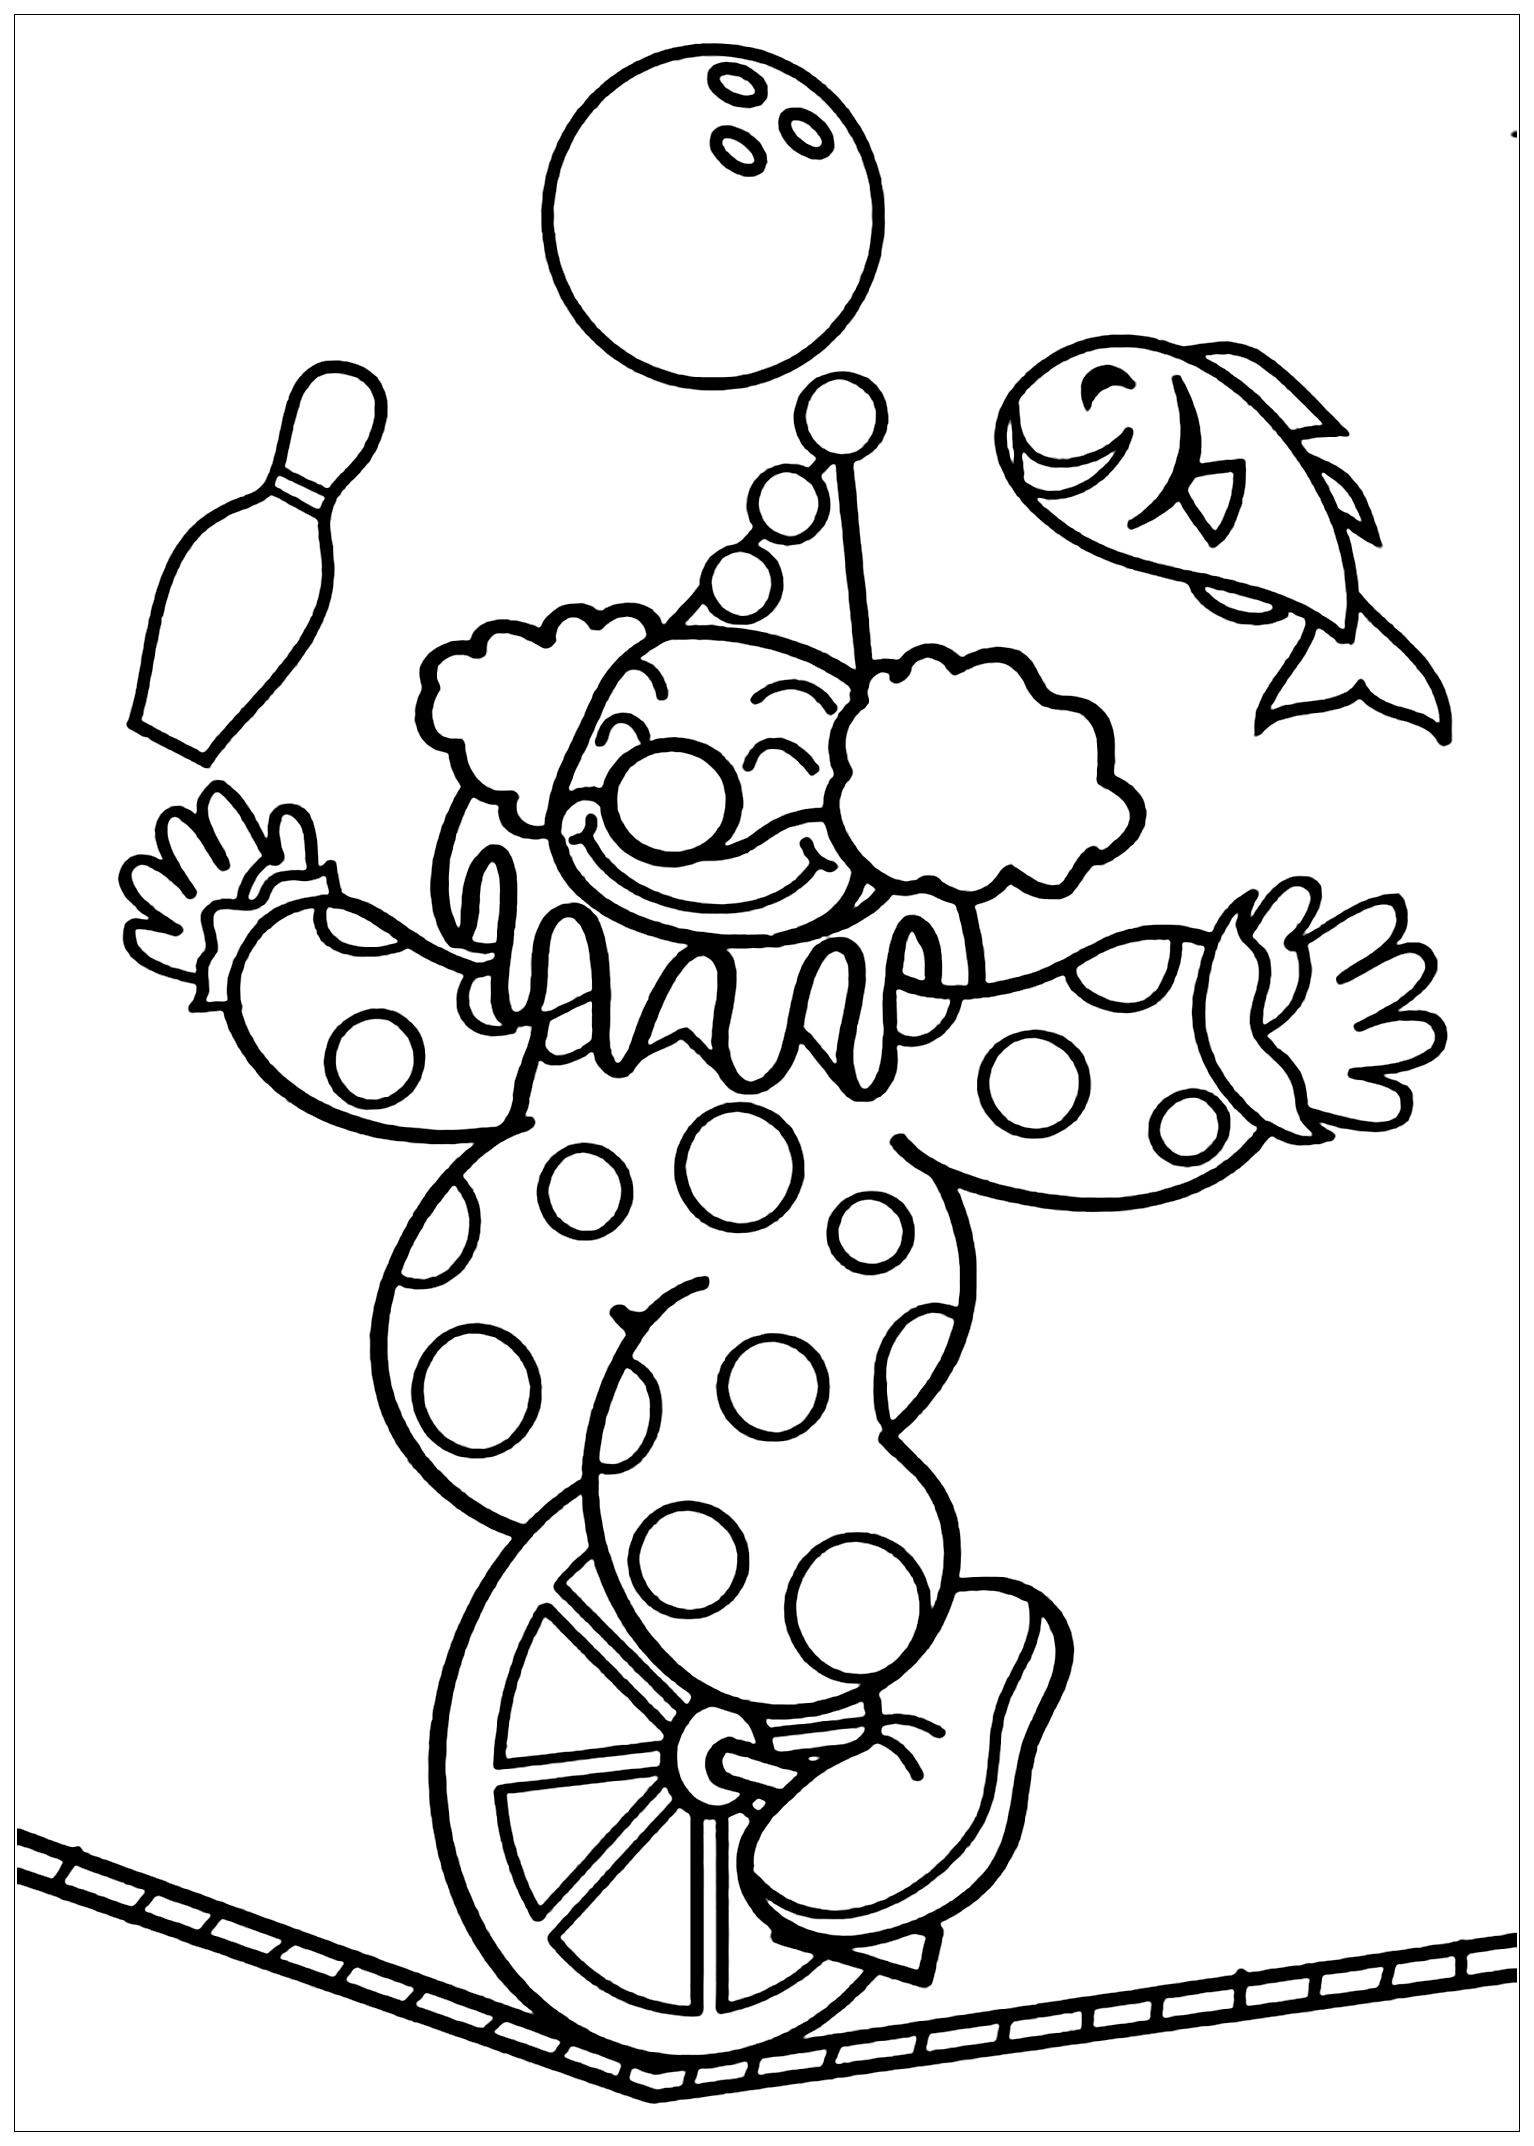 Circus Coloring Pages For Kids - Circus Kids Coloring Pages